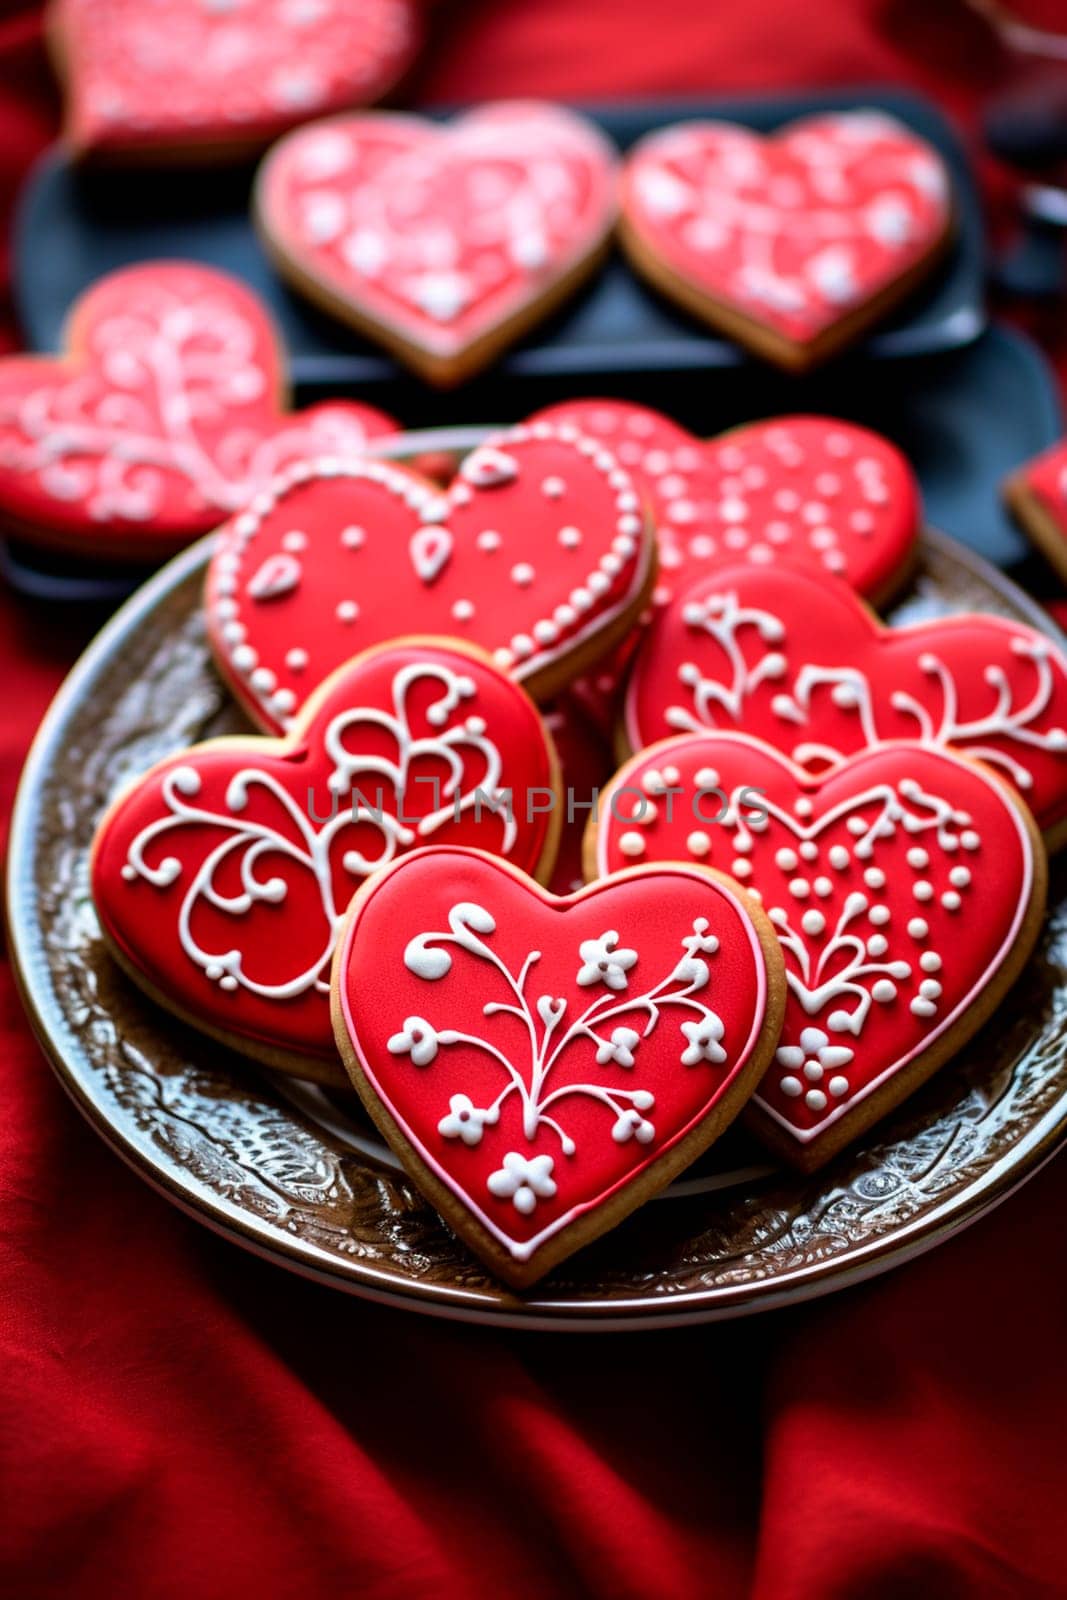 Red heart cookies for Valentine's Day. Selective focus. Food.